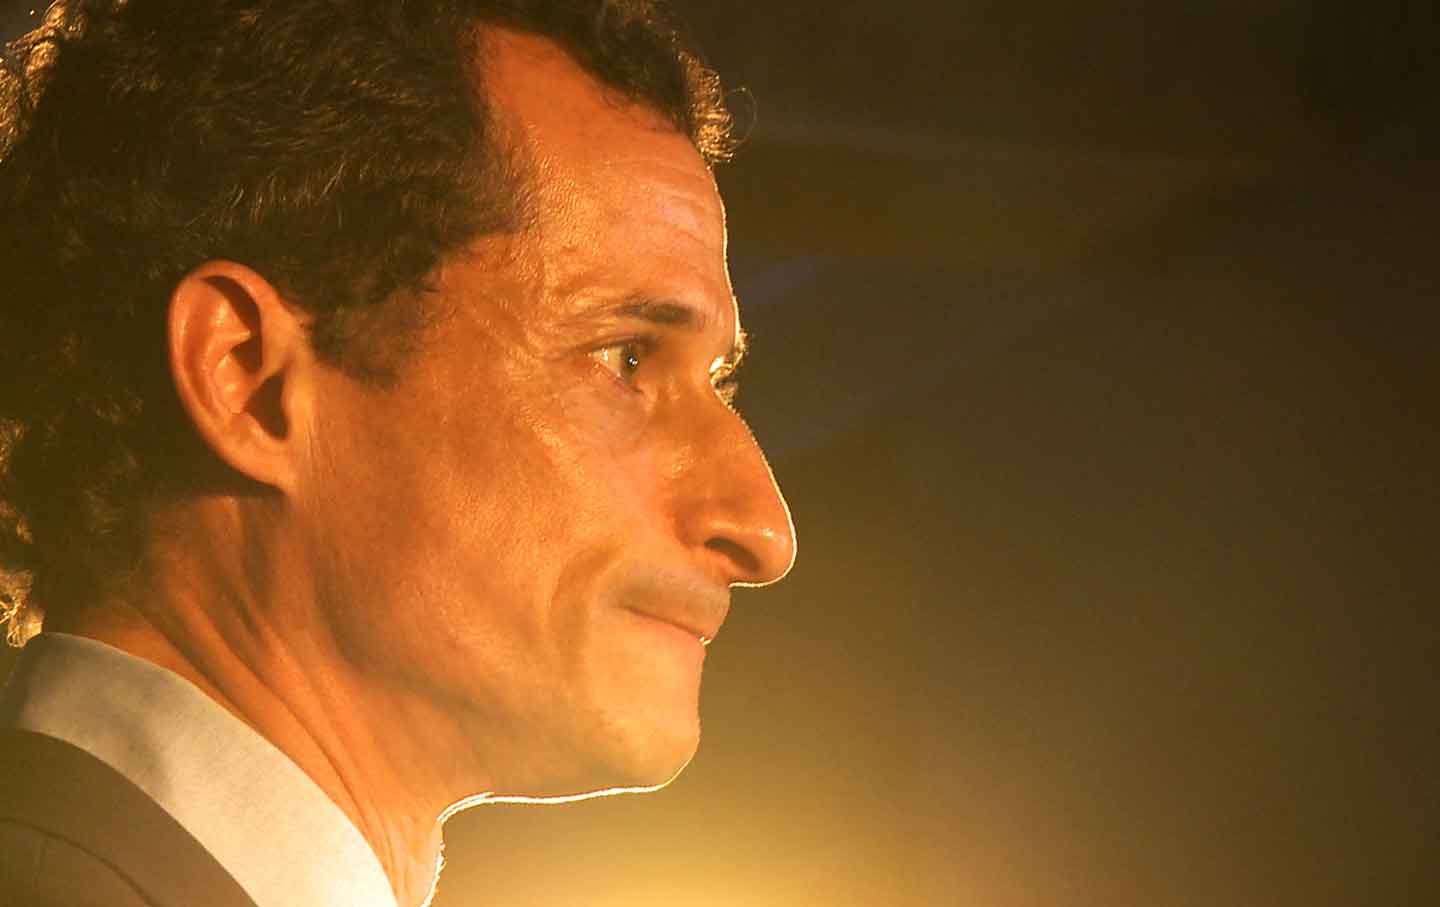 ‘Weiner’: If They Cheer, or if They Jeer